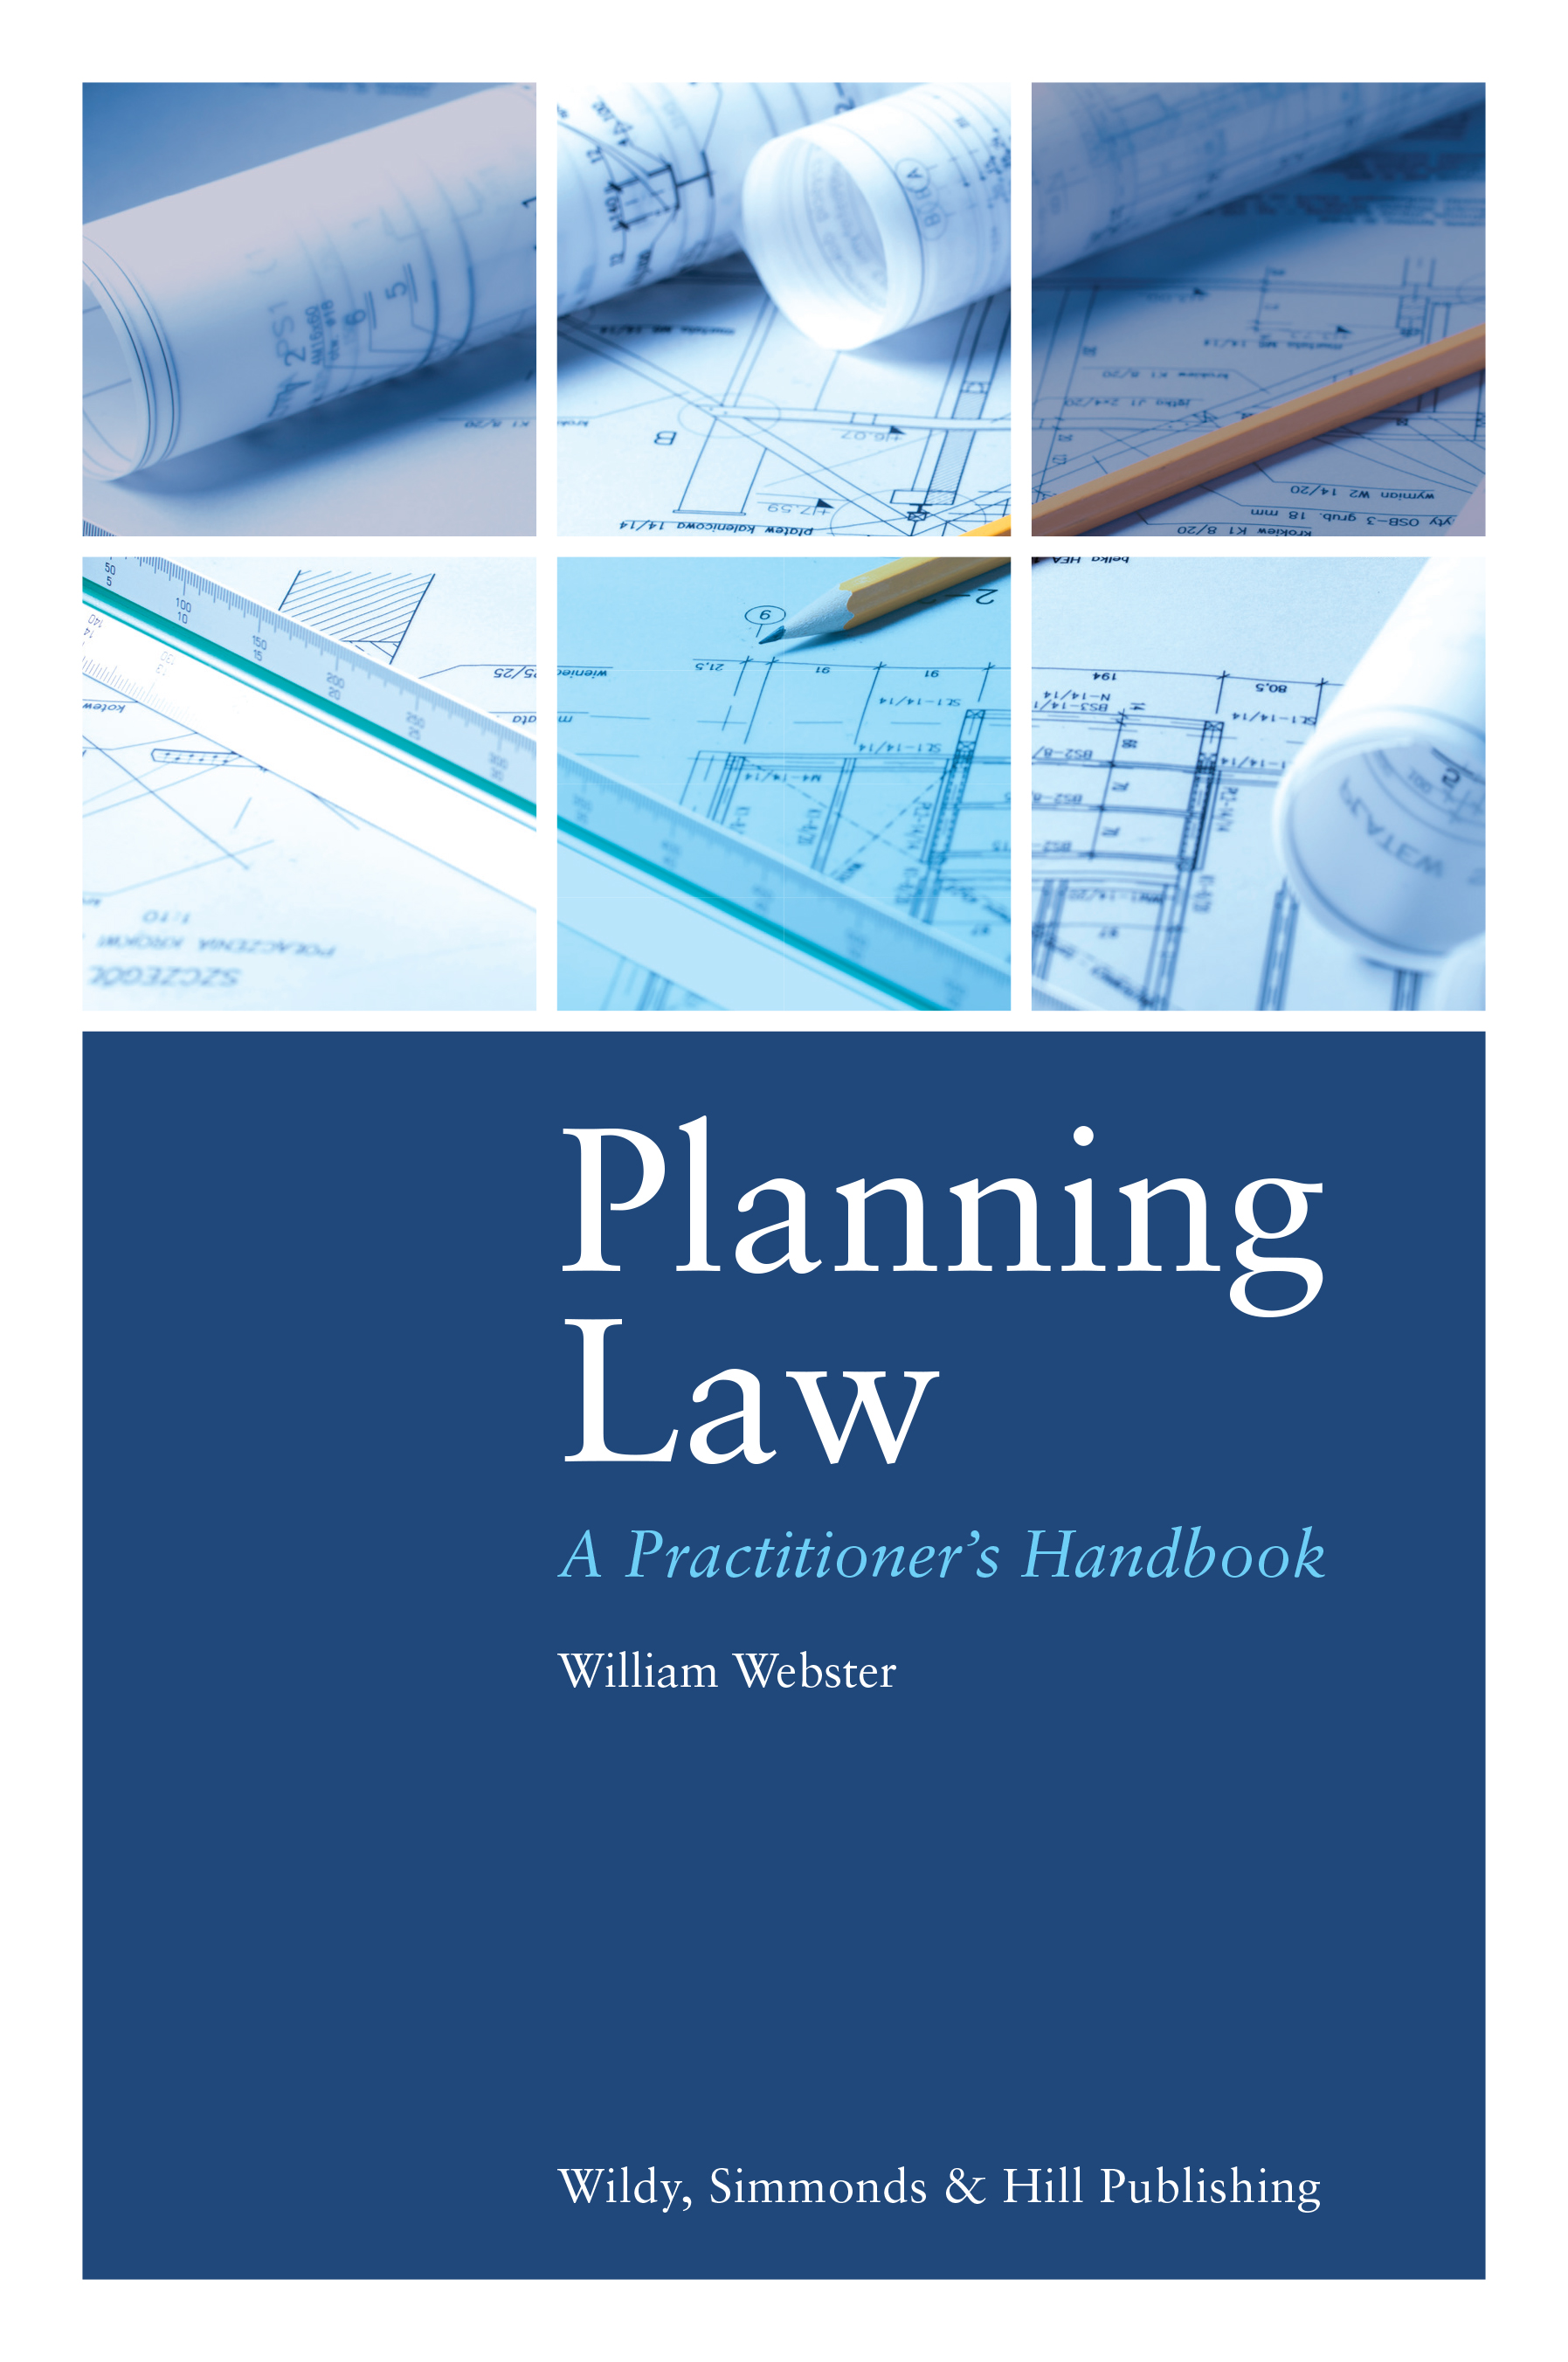 Planning Law cover high res 2